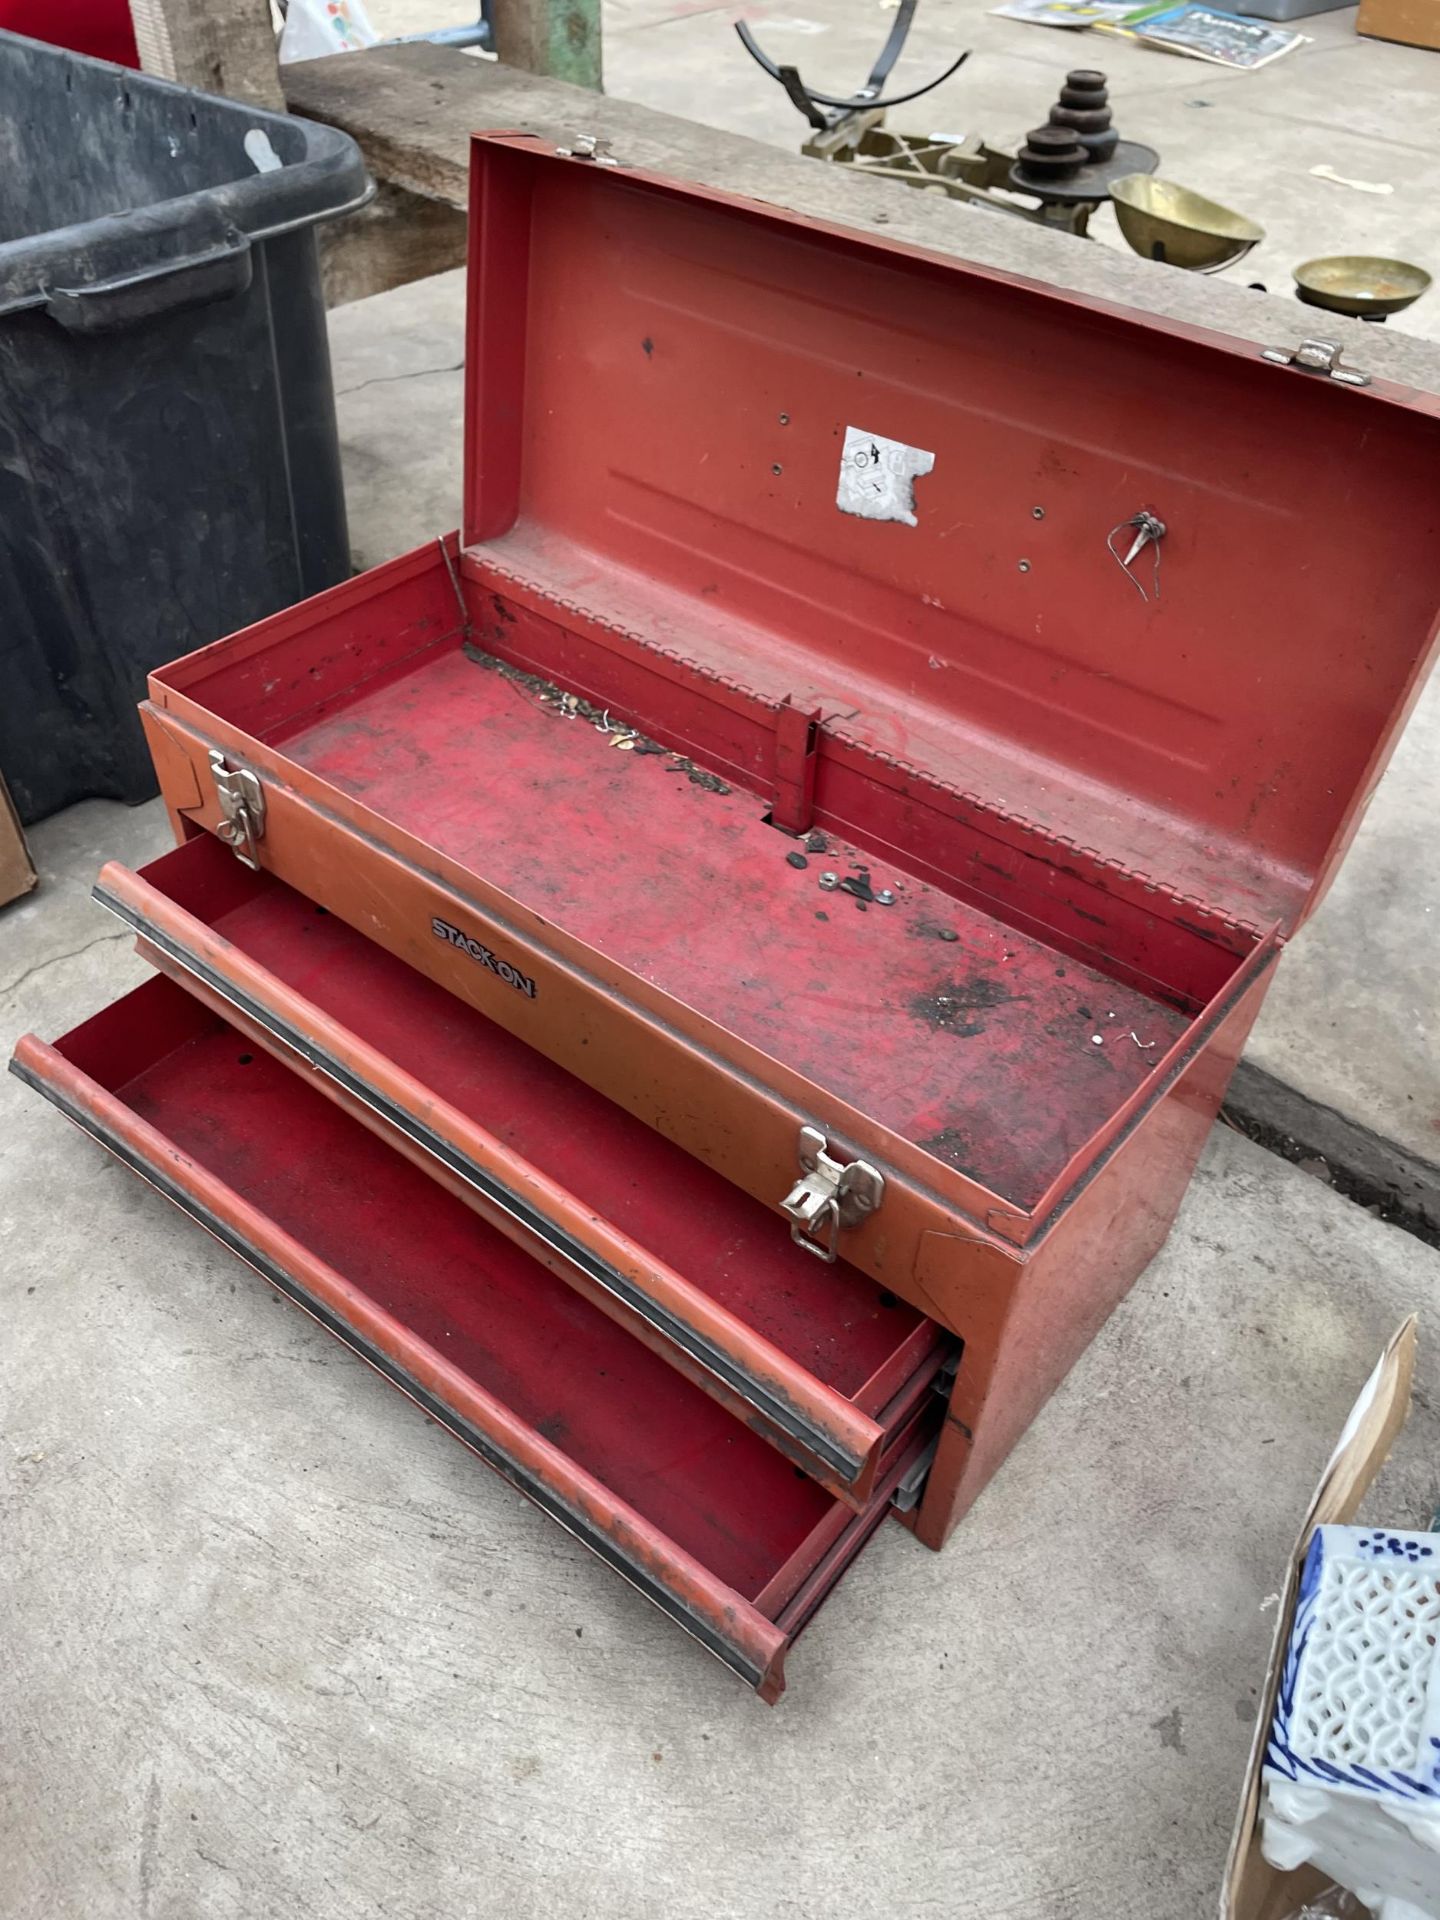 A RED METAL STACK ON TOOL BOX